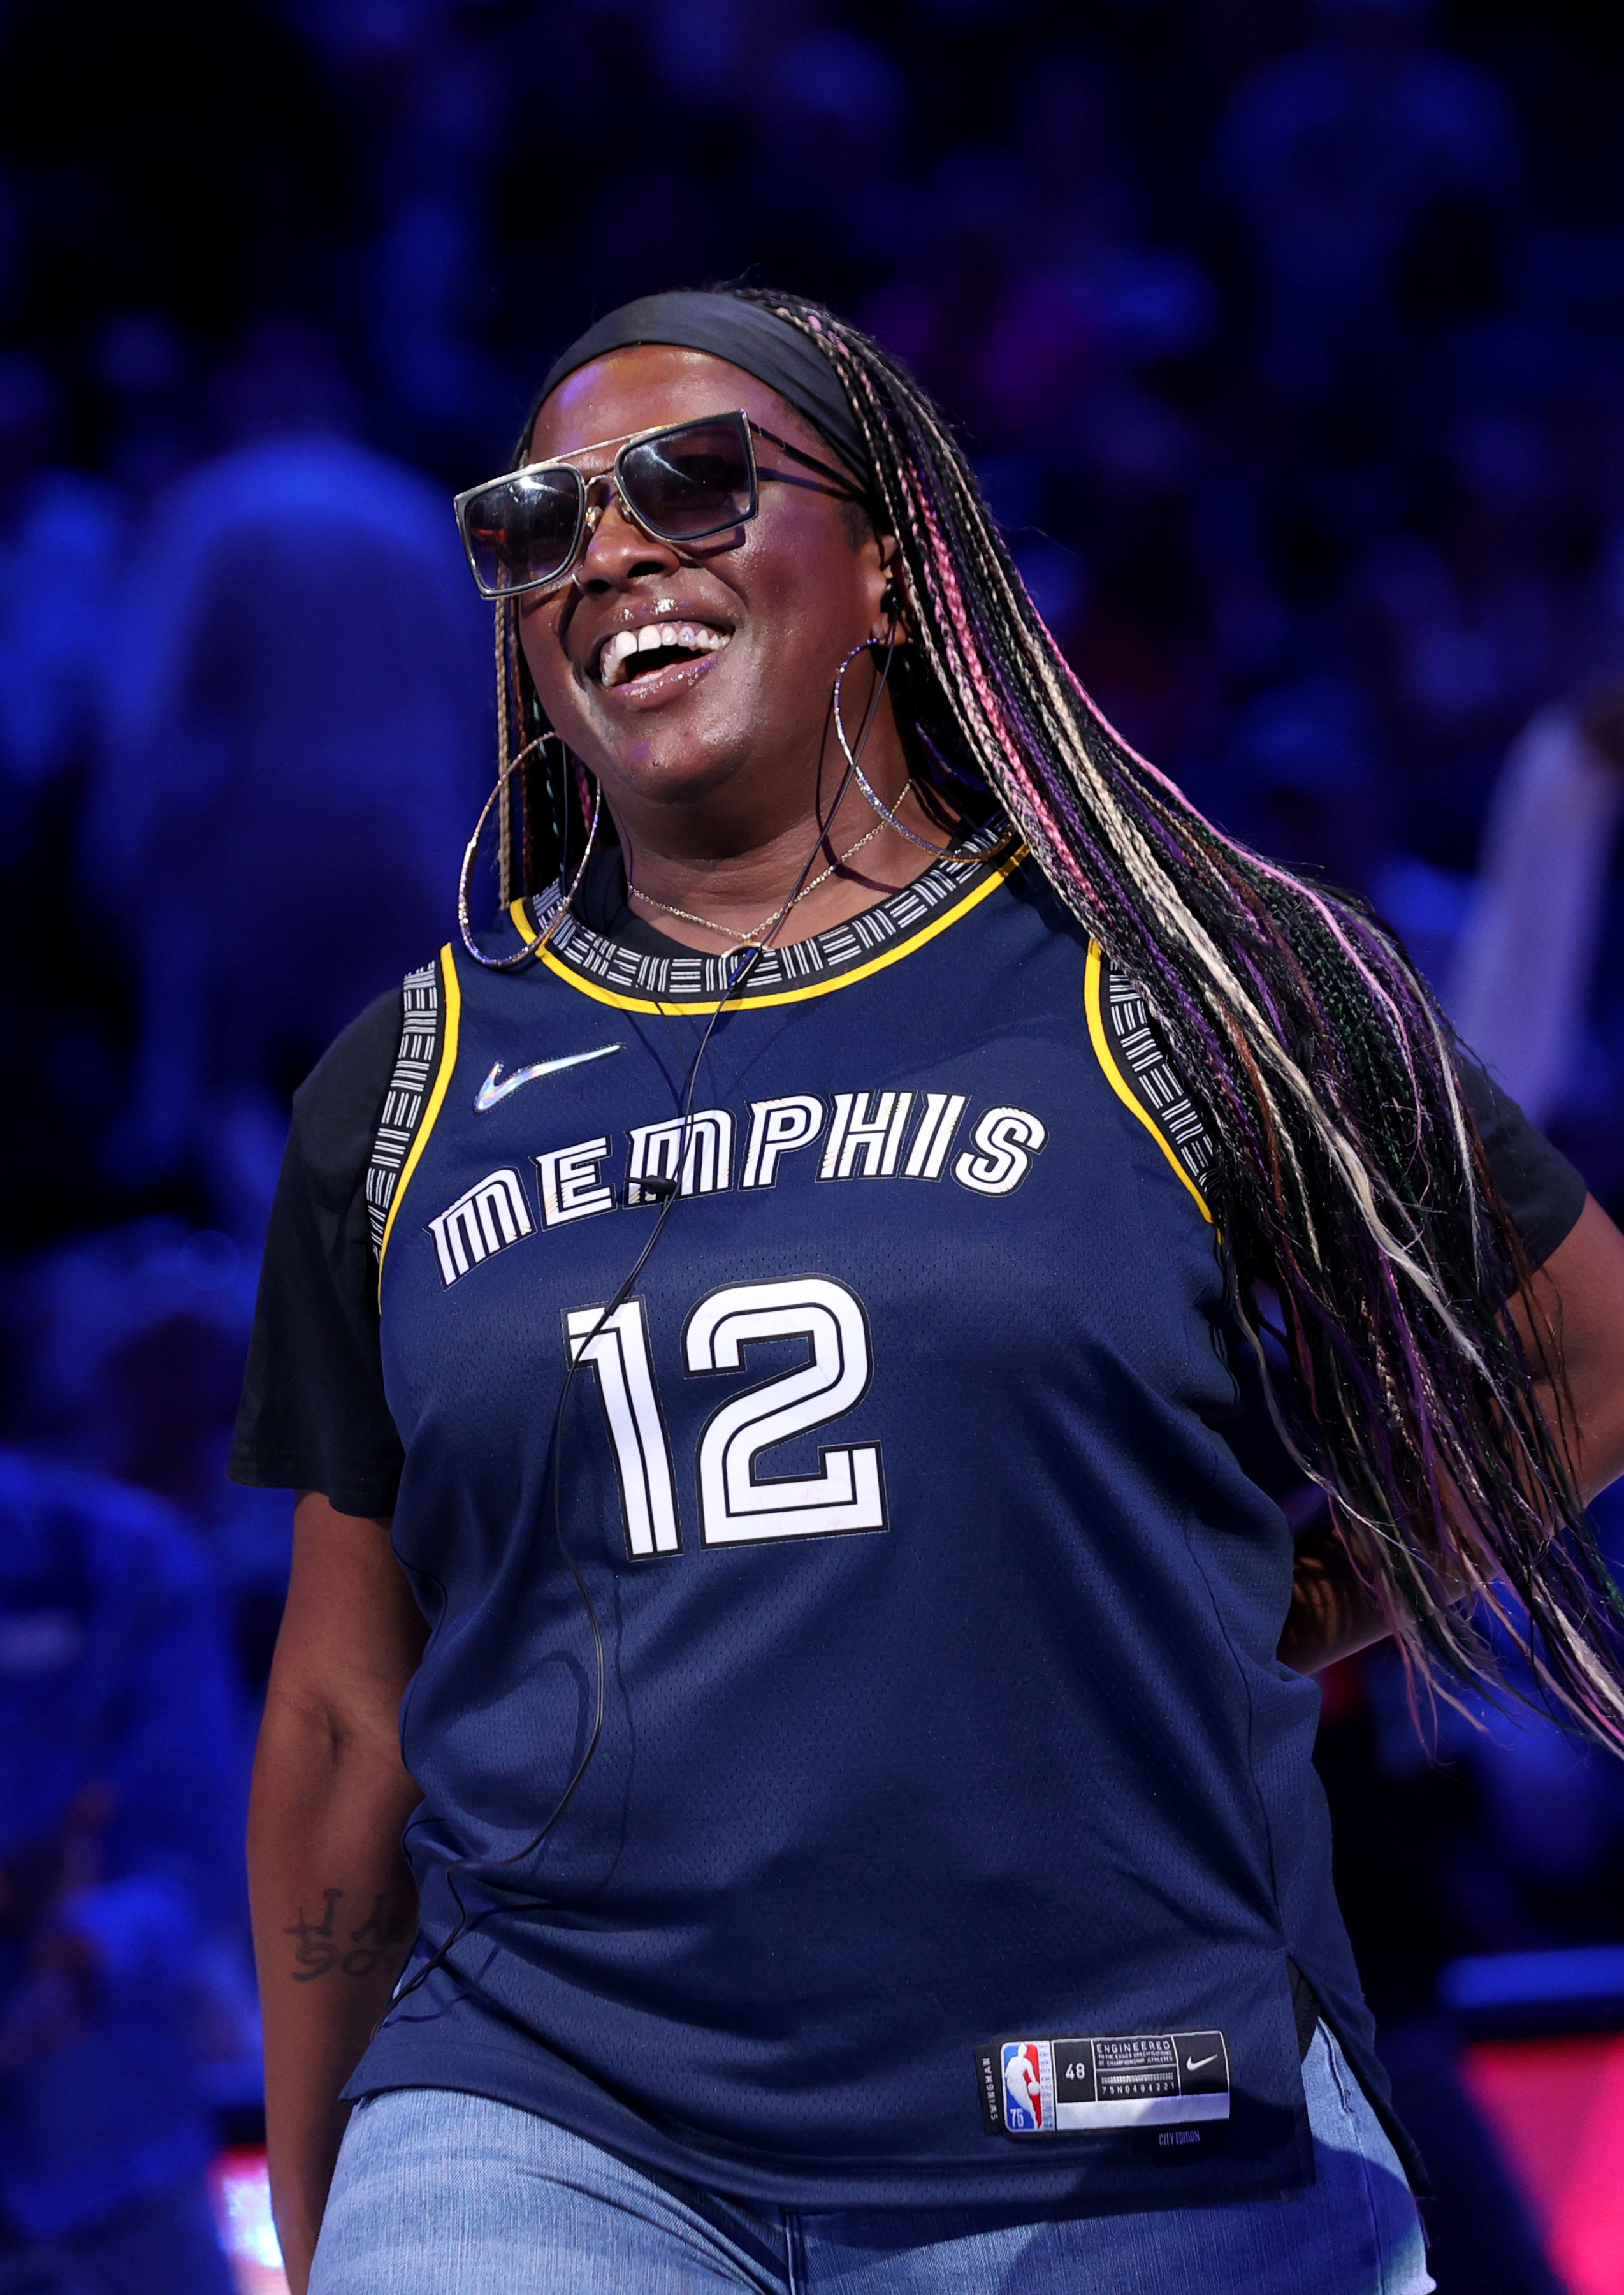 Gangsta Boo performs during the 2022 NBA playoffs between the Golden State Warriors and the Memphis Grizzlies on May 1, 2022, at FedExForum in Memphis